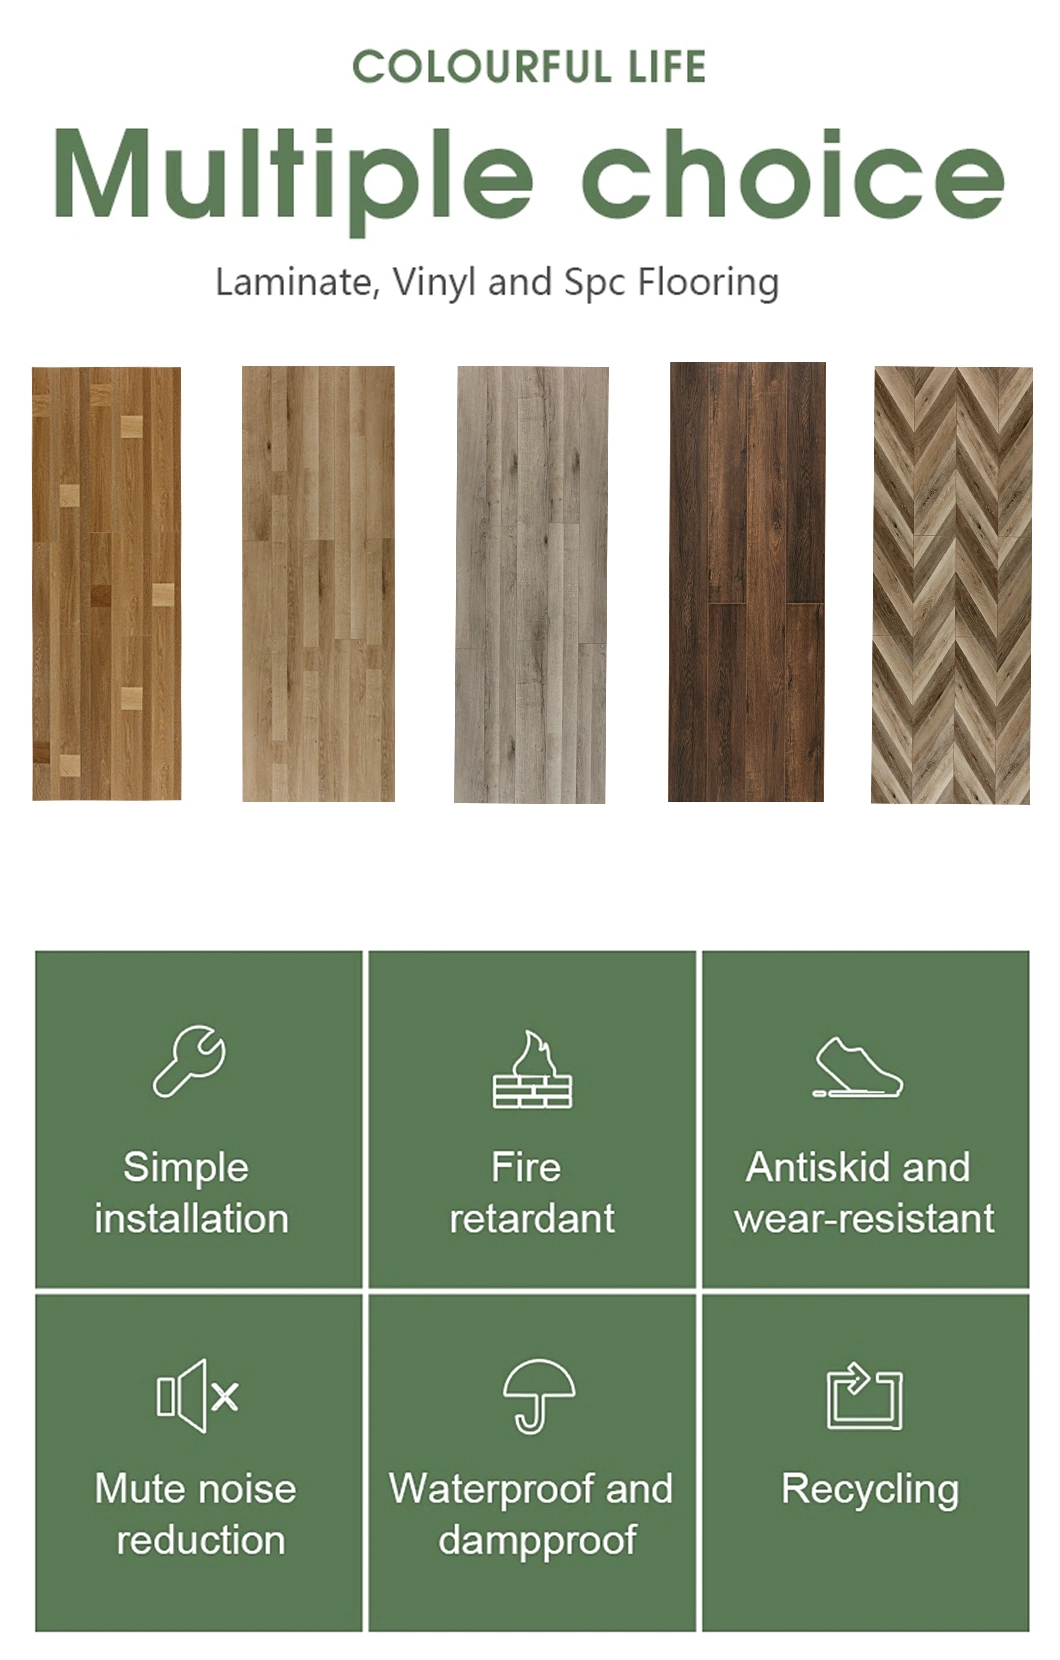 Nordic Style High Quality Laminate Flooring Decoration Materials Bedroom Kitchen Wooden Laminate Floor Tiles500 - 1999 Square Meters